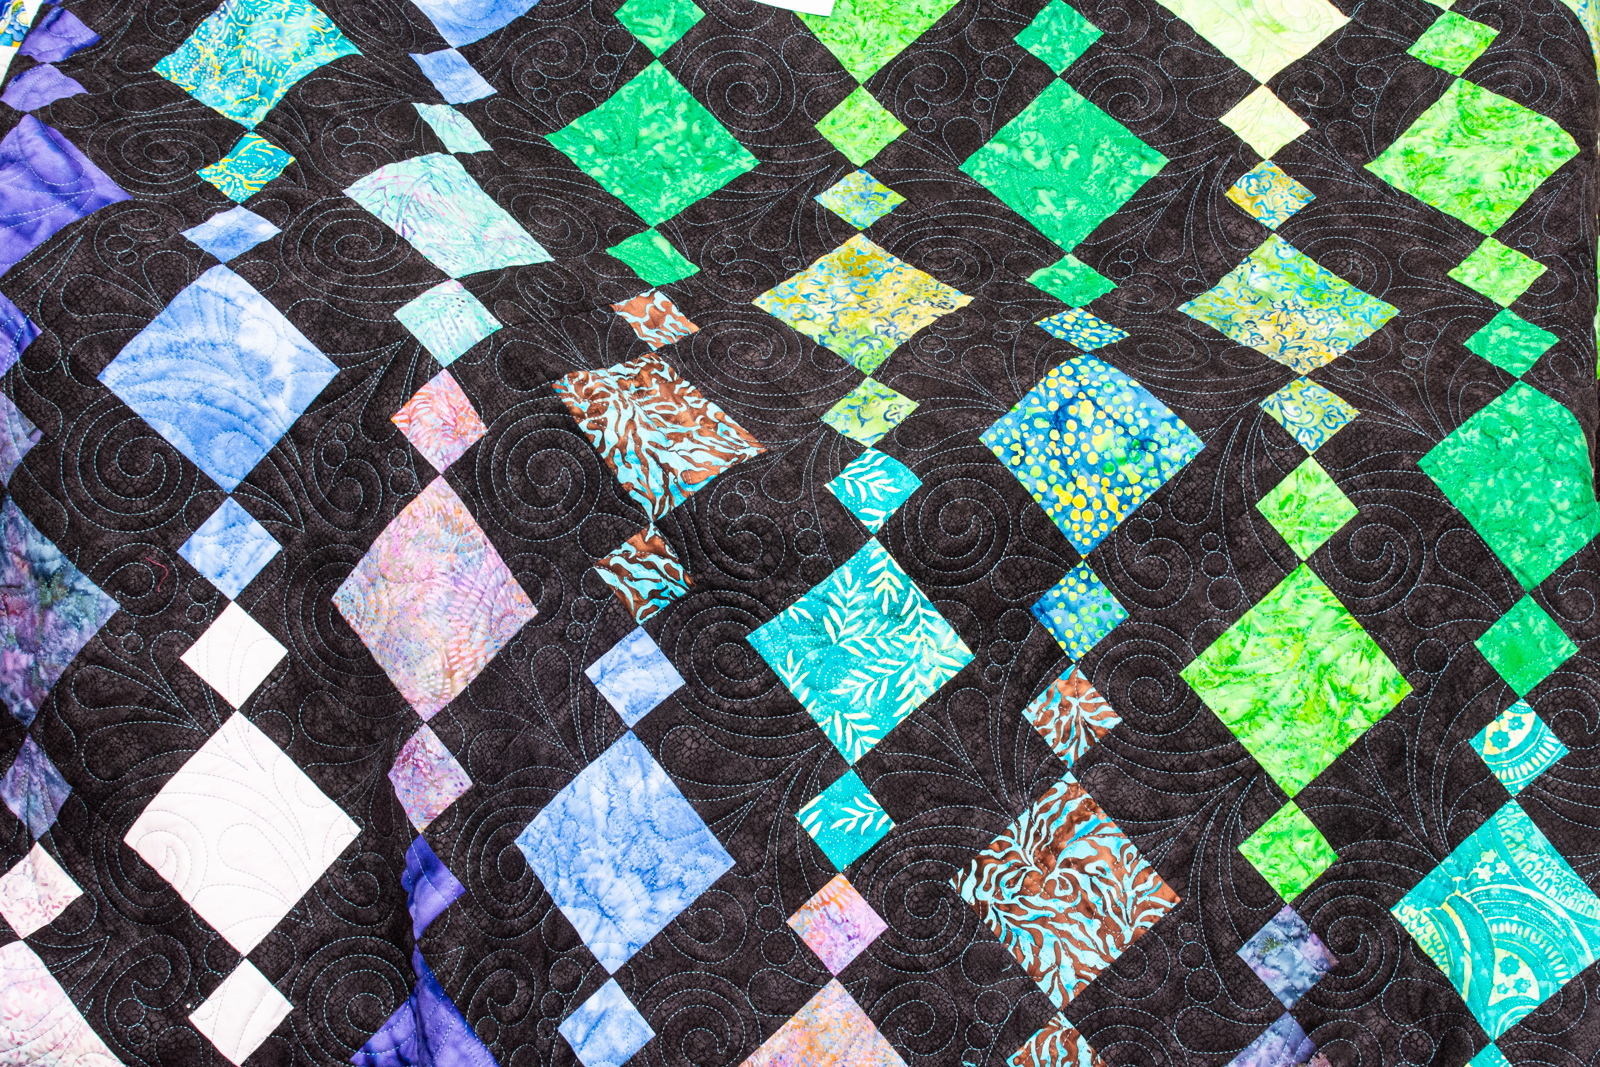 Example of what how a quilting machine can make complex patterns to stitch quilt layers together.